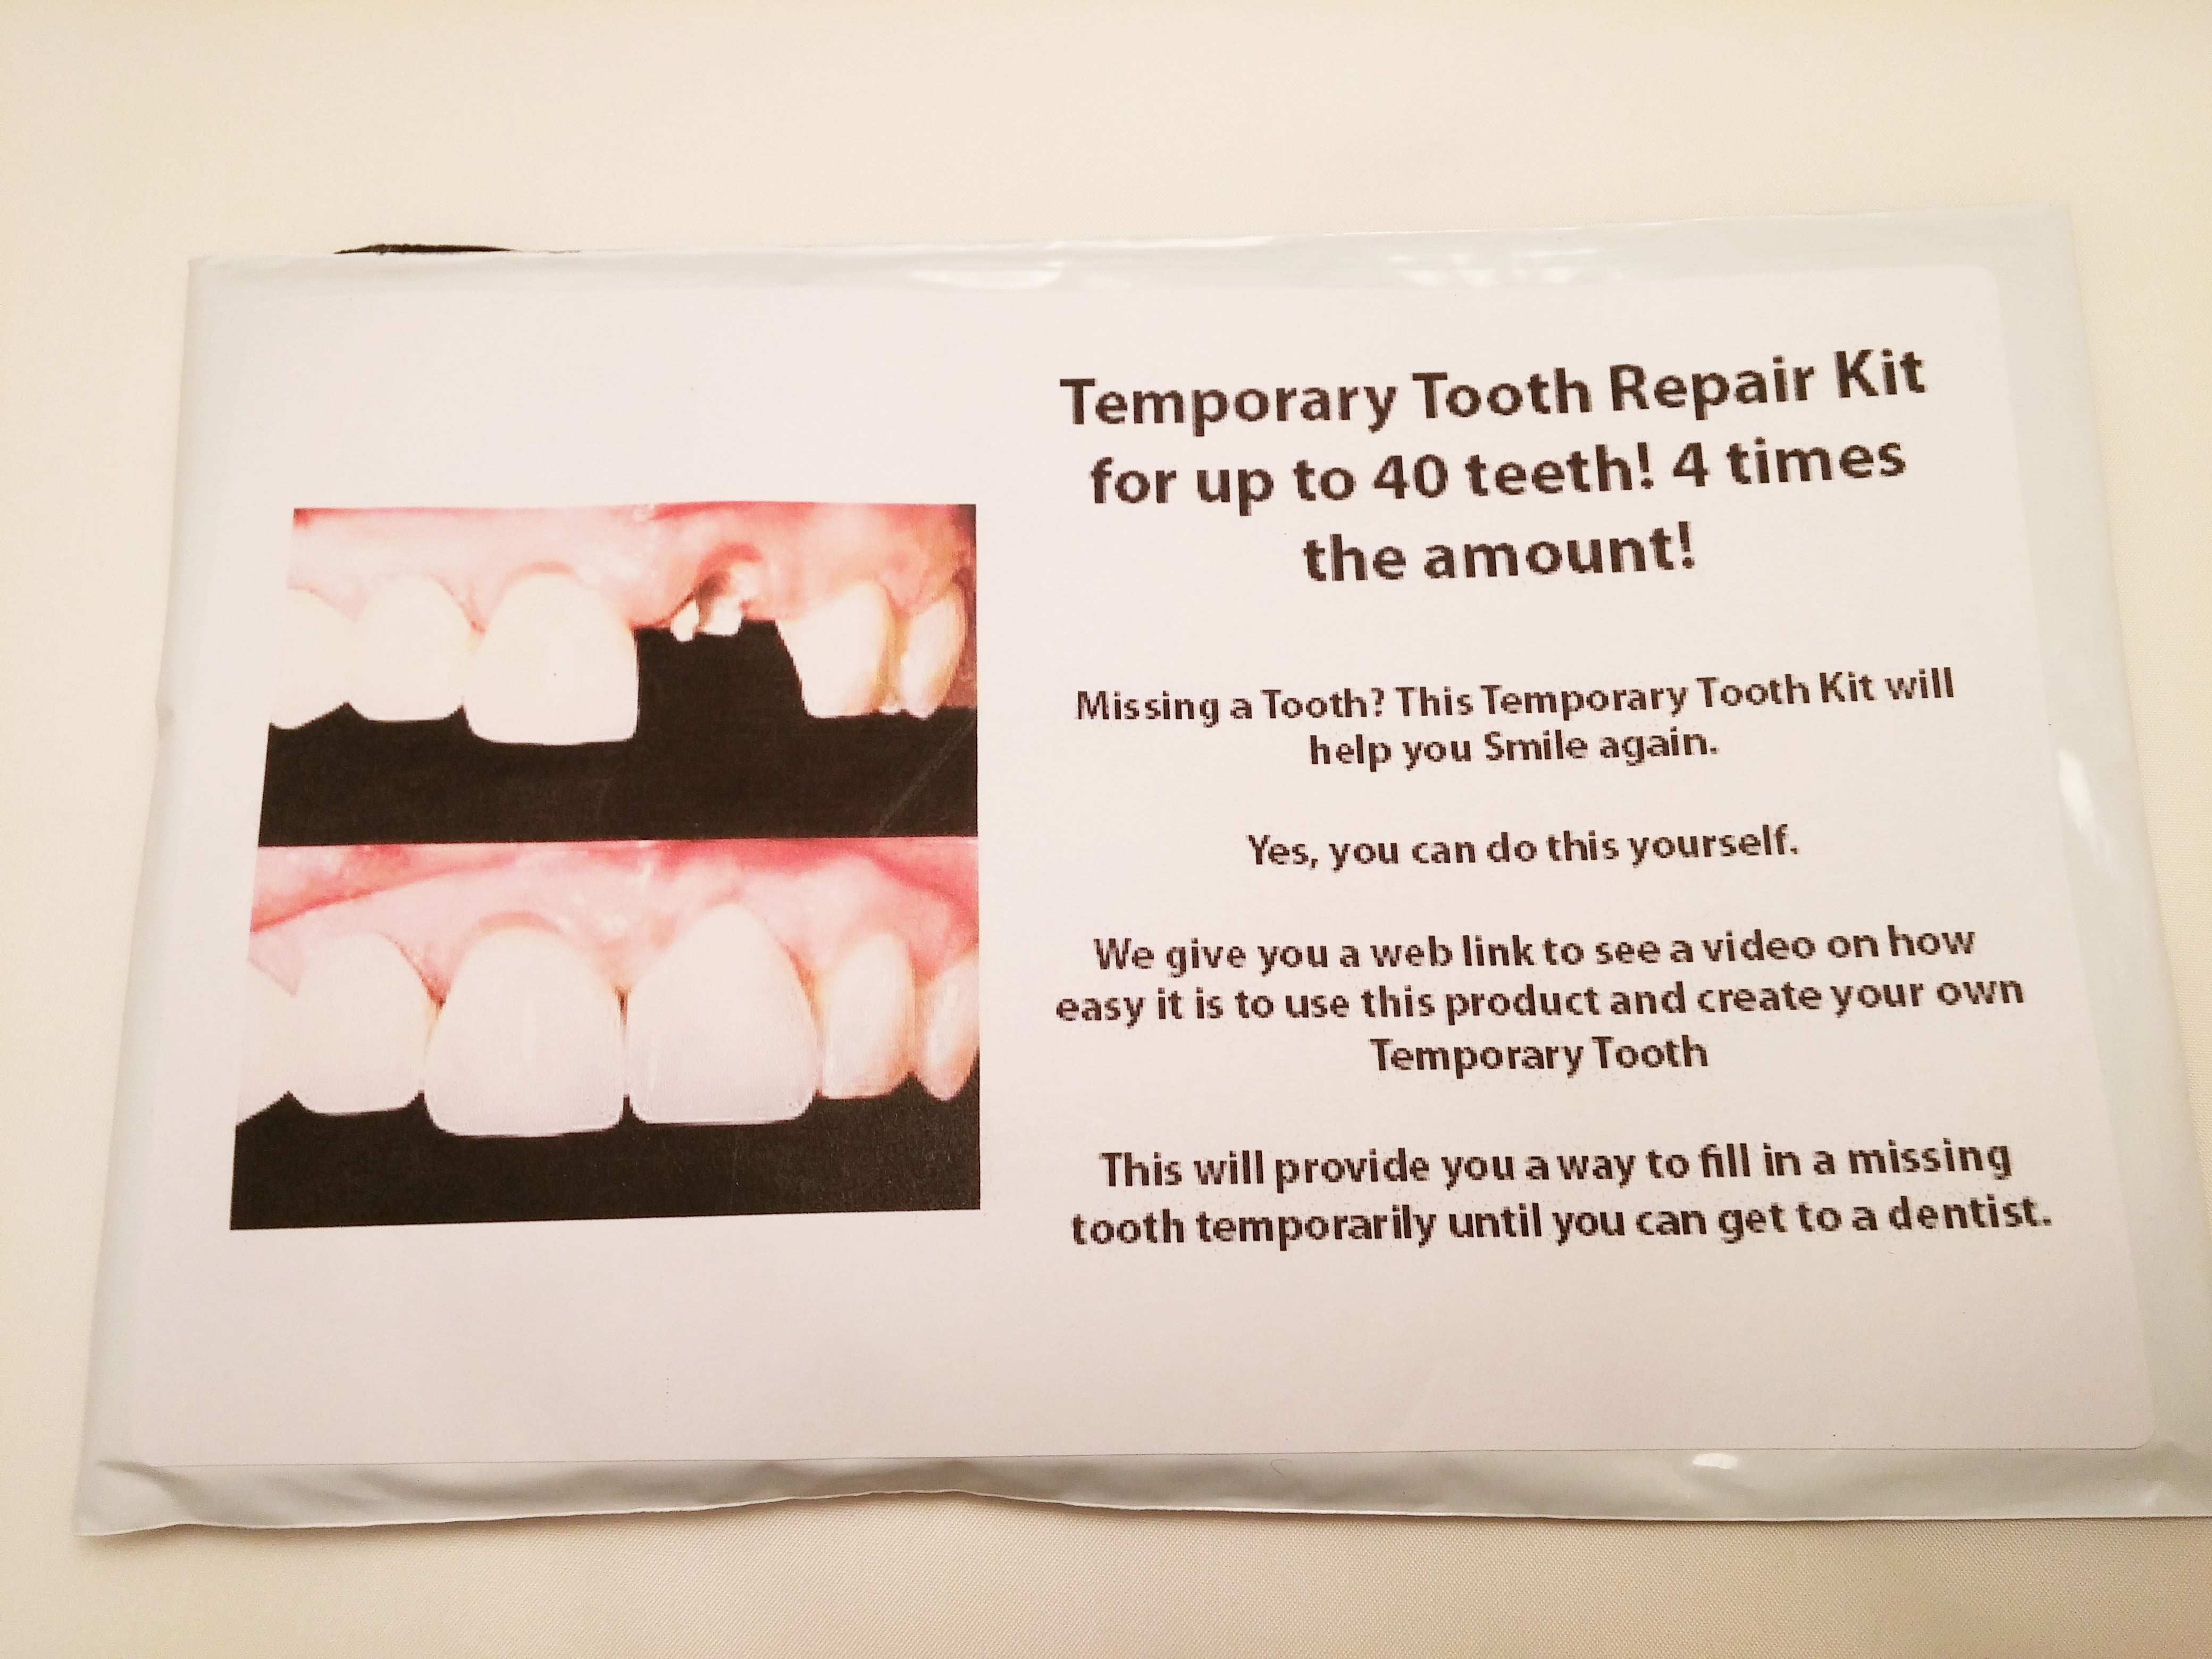 Temporary tooth repair kit dental fix missing up to 40 teeth! 4 times amount!